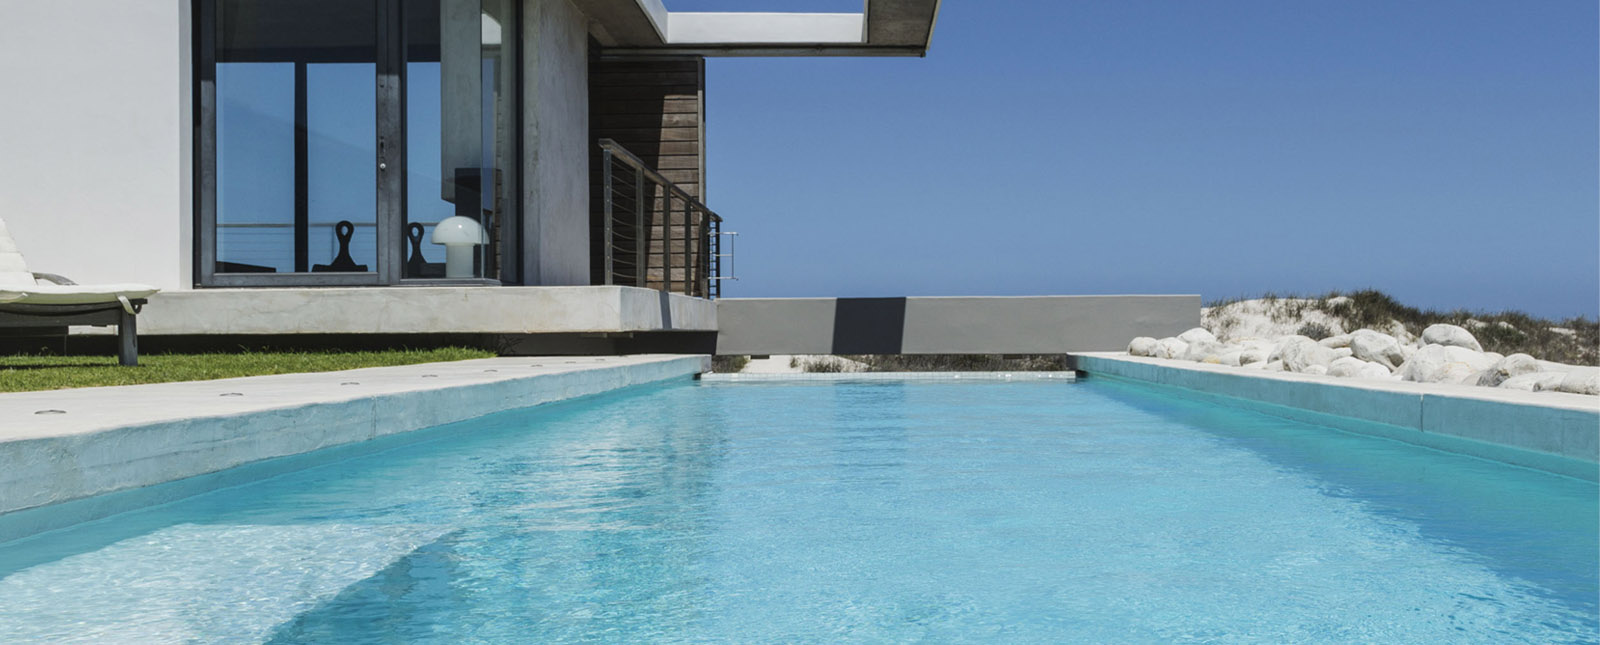 Renovating your pool: the key questions